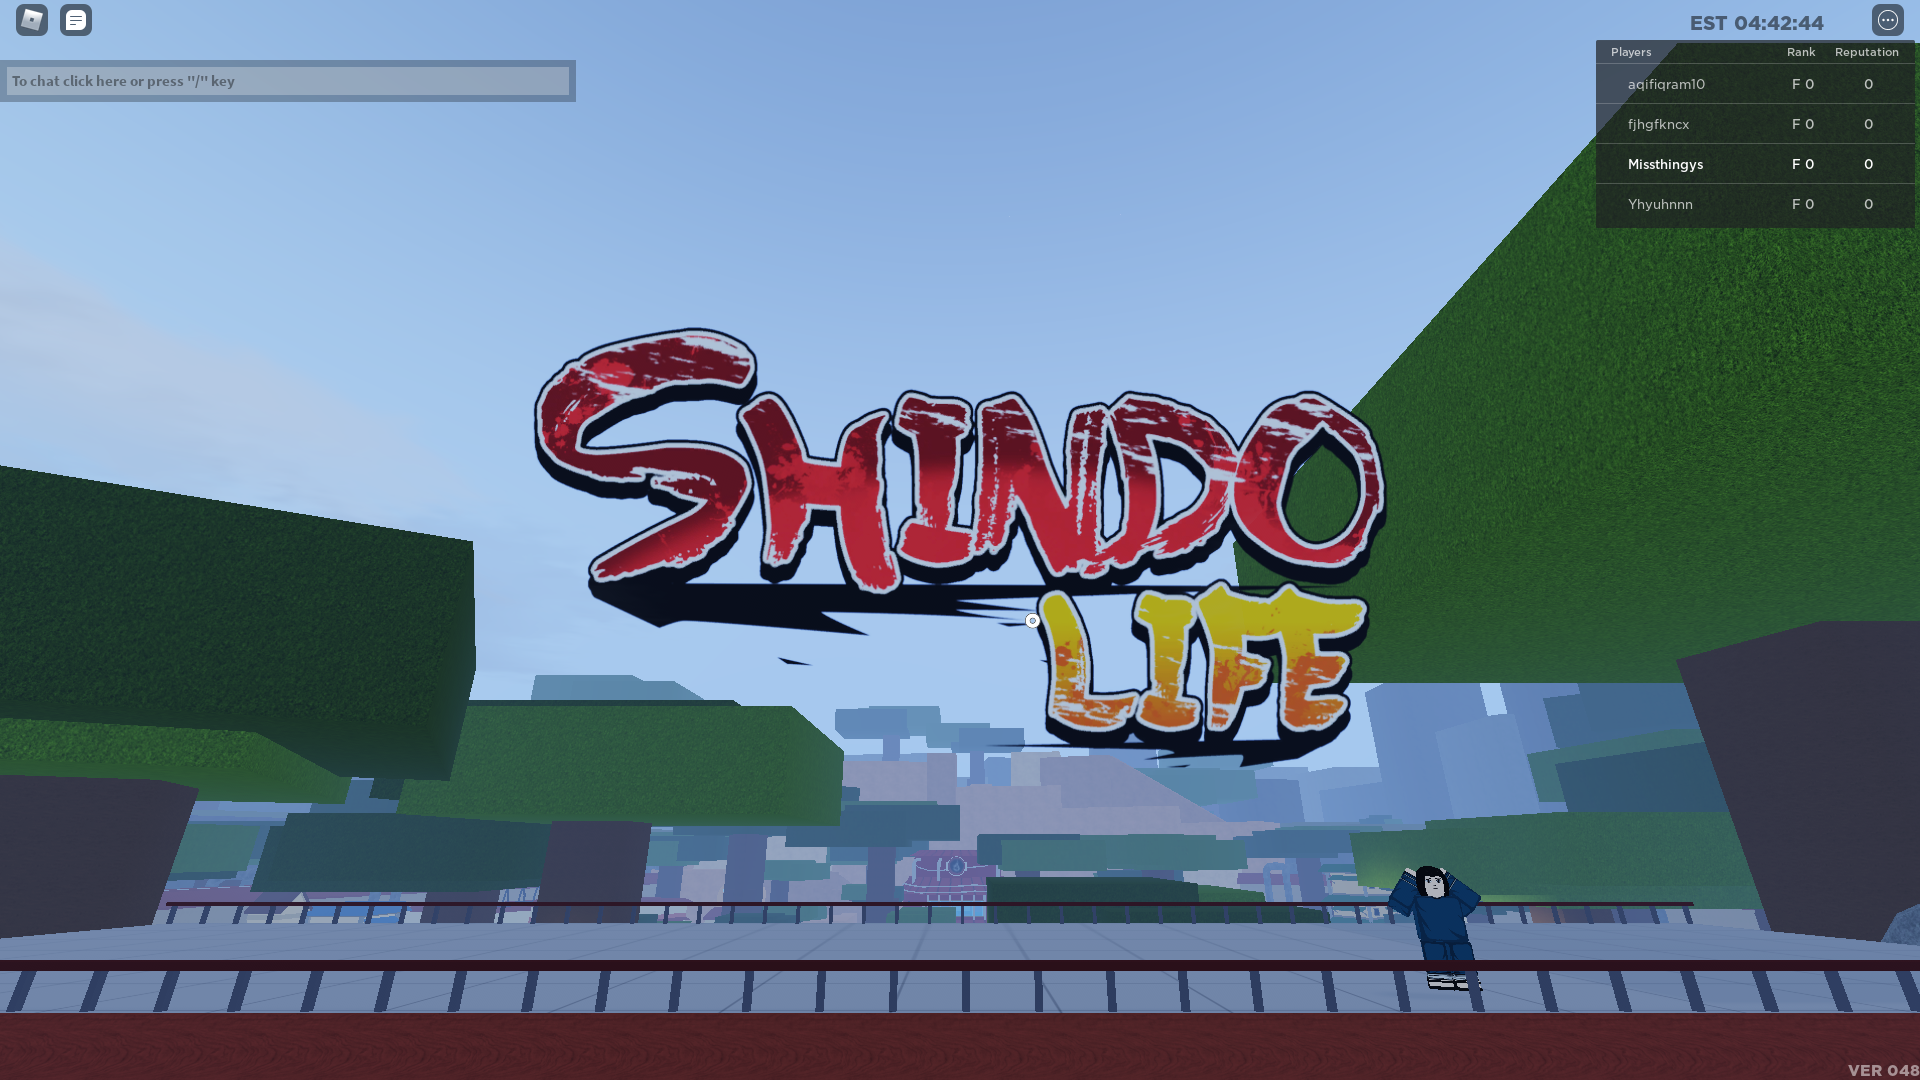 NEW* ALL WORKING CODES FOR SHINDO LIFE 2023 JULY! ROBLOX SHINDO